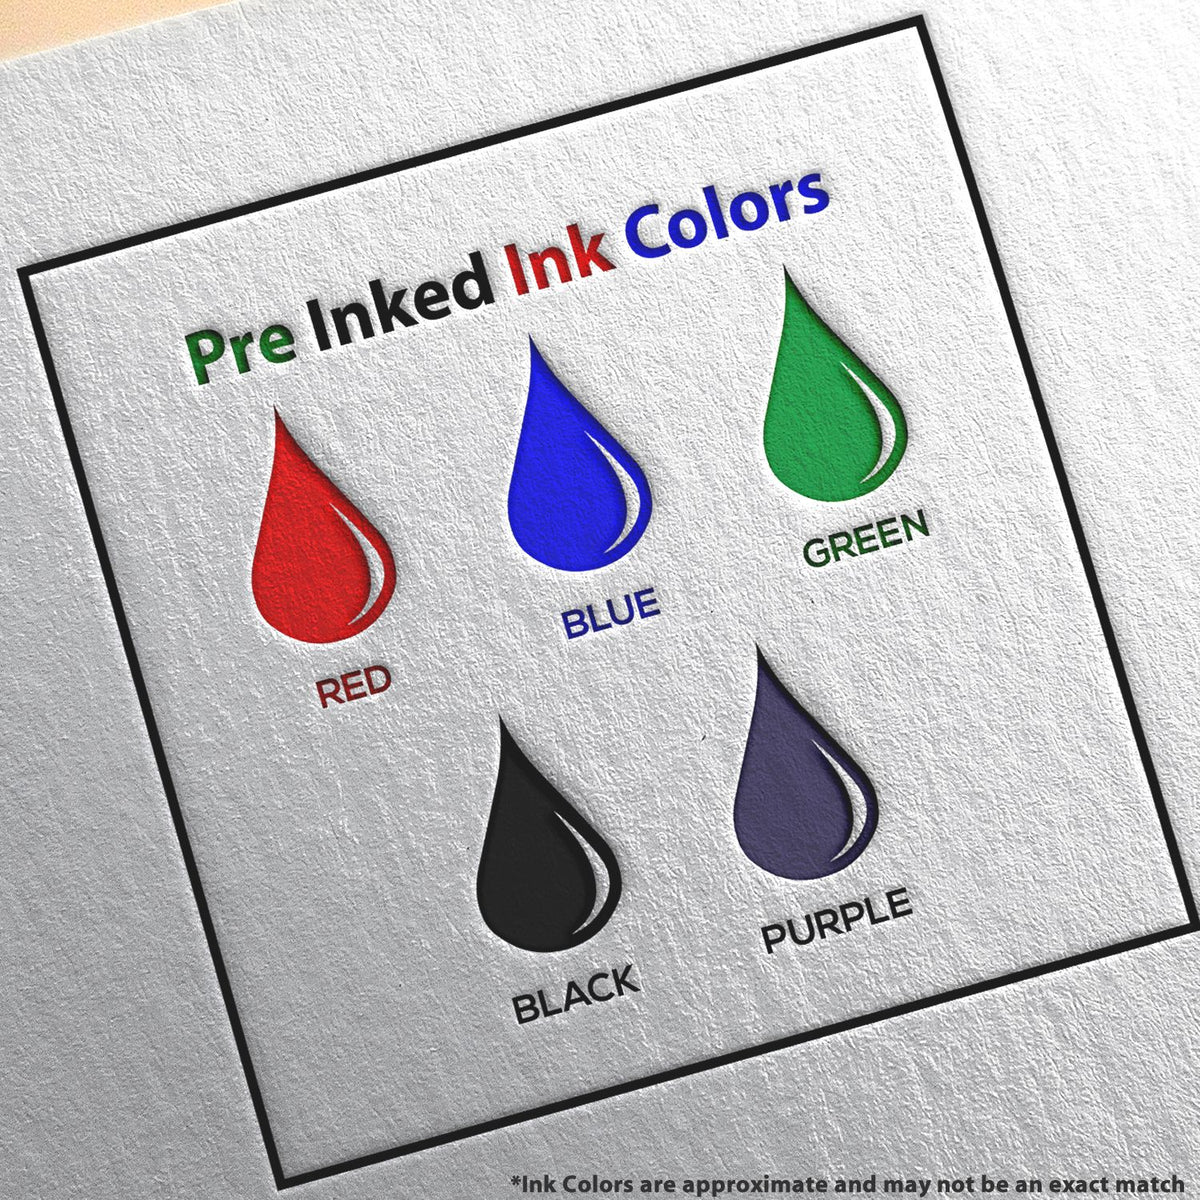 A picture showing the different ink colors or hues available for the Slim Pre-Inked Rhode Island Professional Engineer Seal Stamp product.